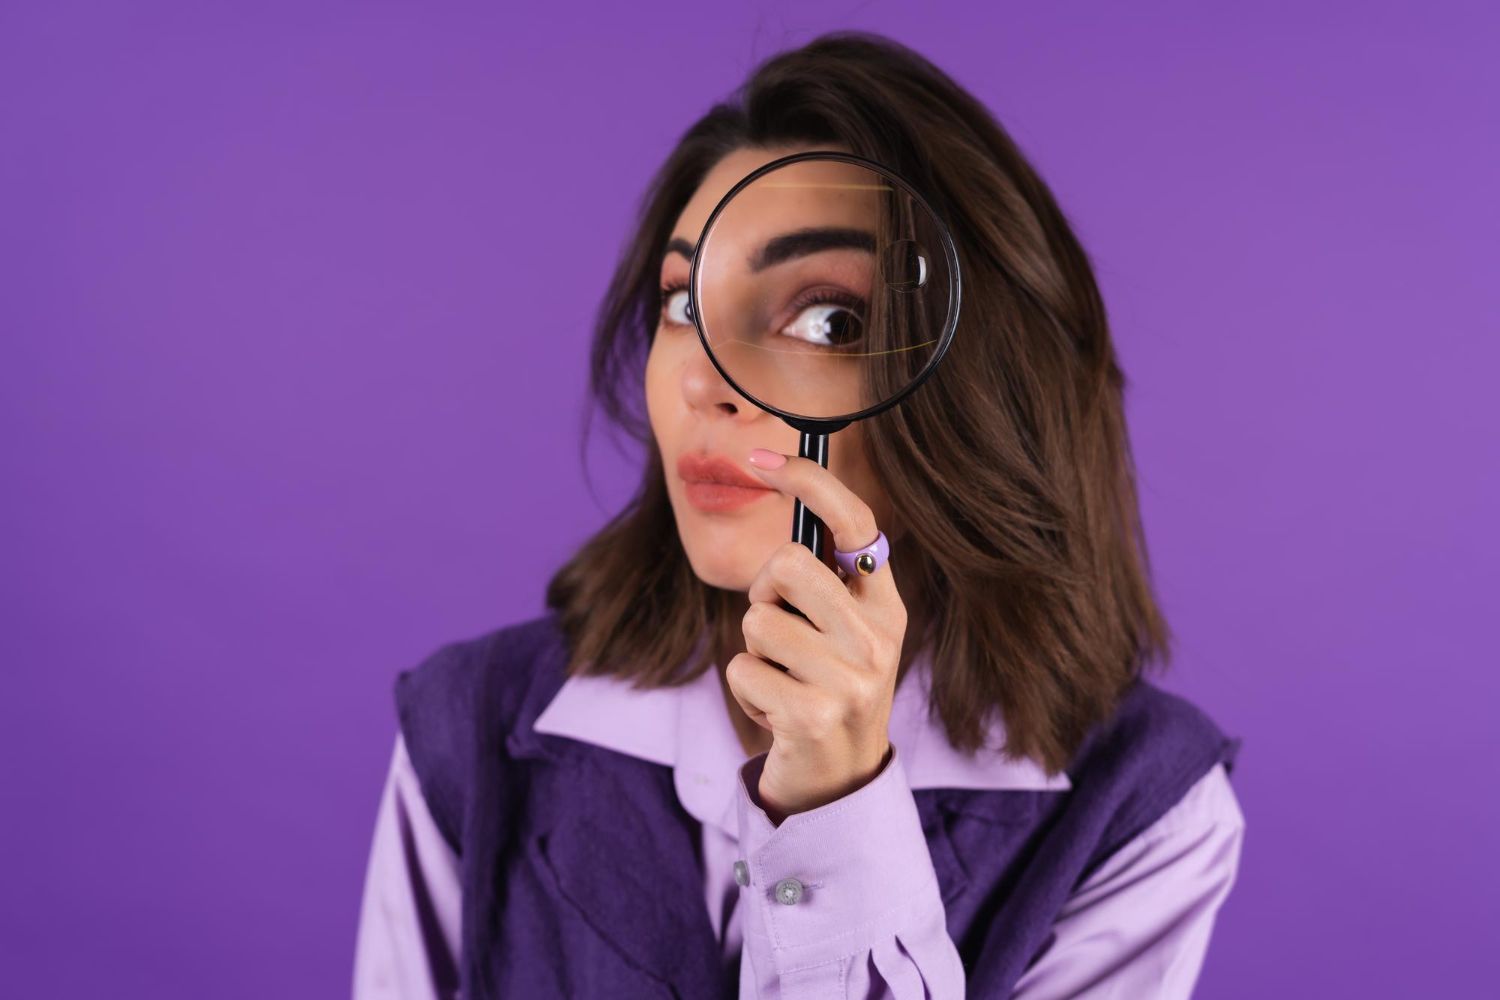 young woman shirt vest purple background having fun with magnifying glass hand